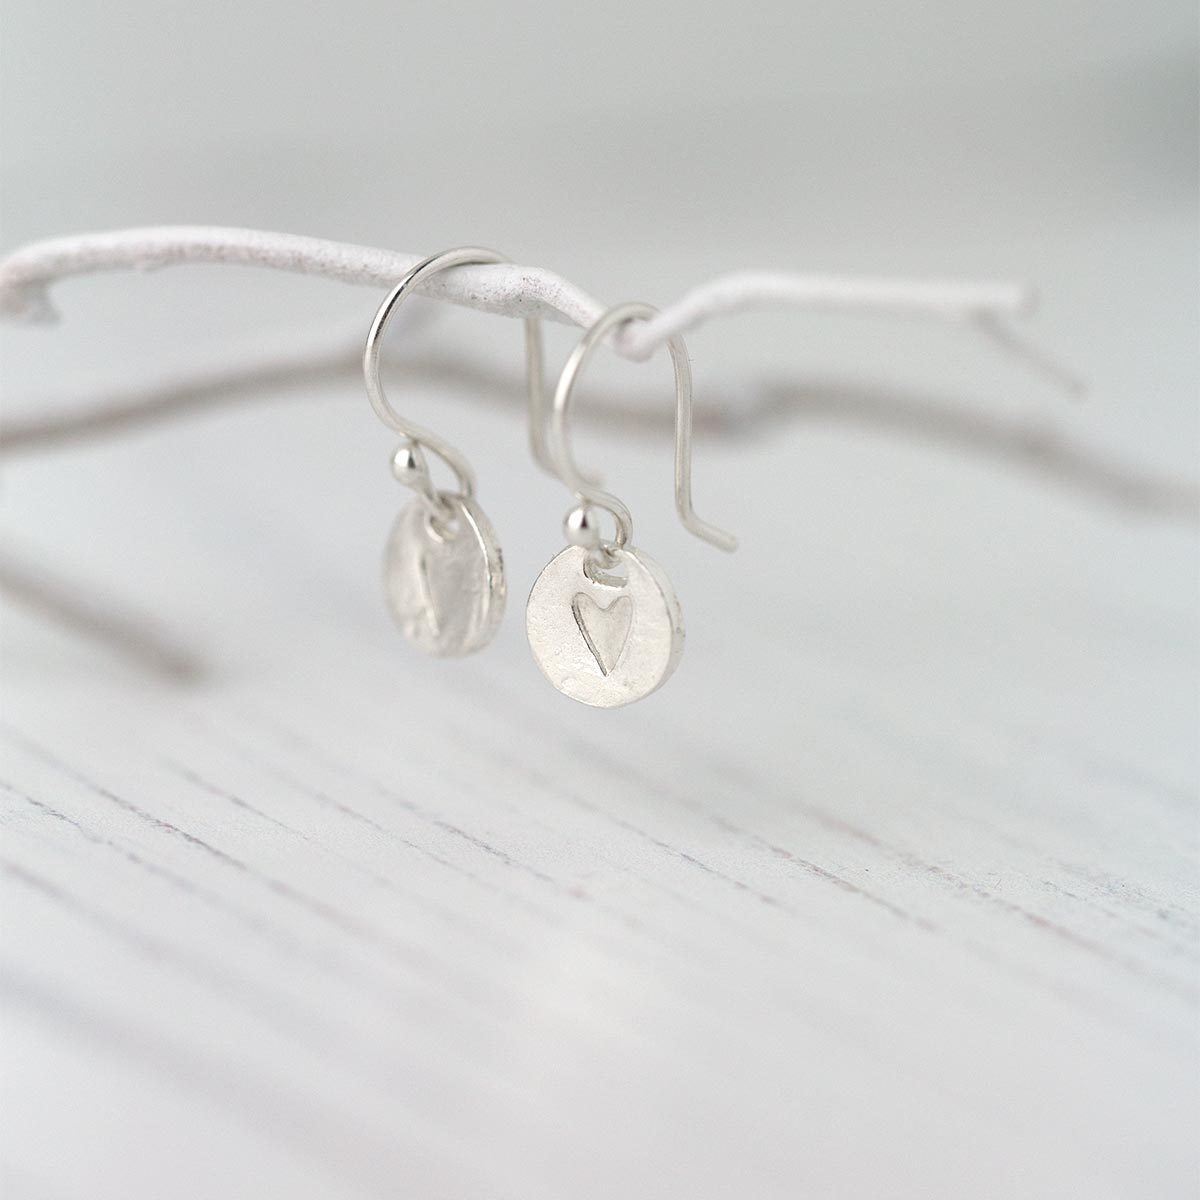 Hand Stamped Heart Earrings - Handmade Jewelry by Burnish